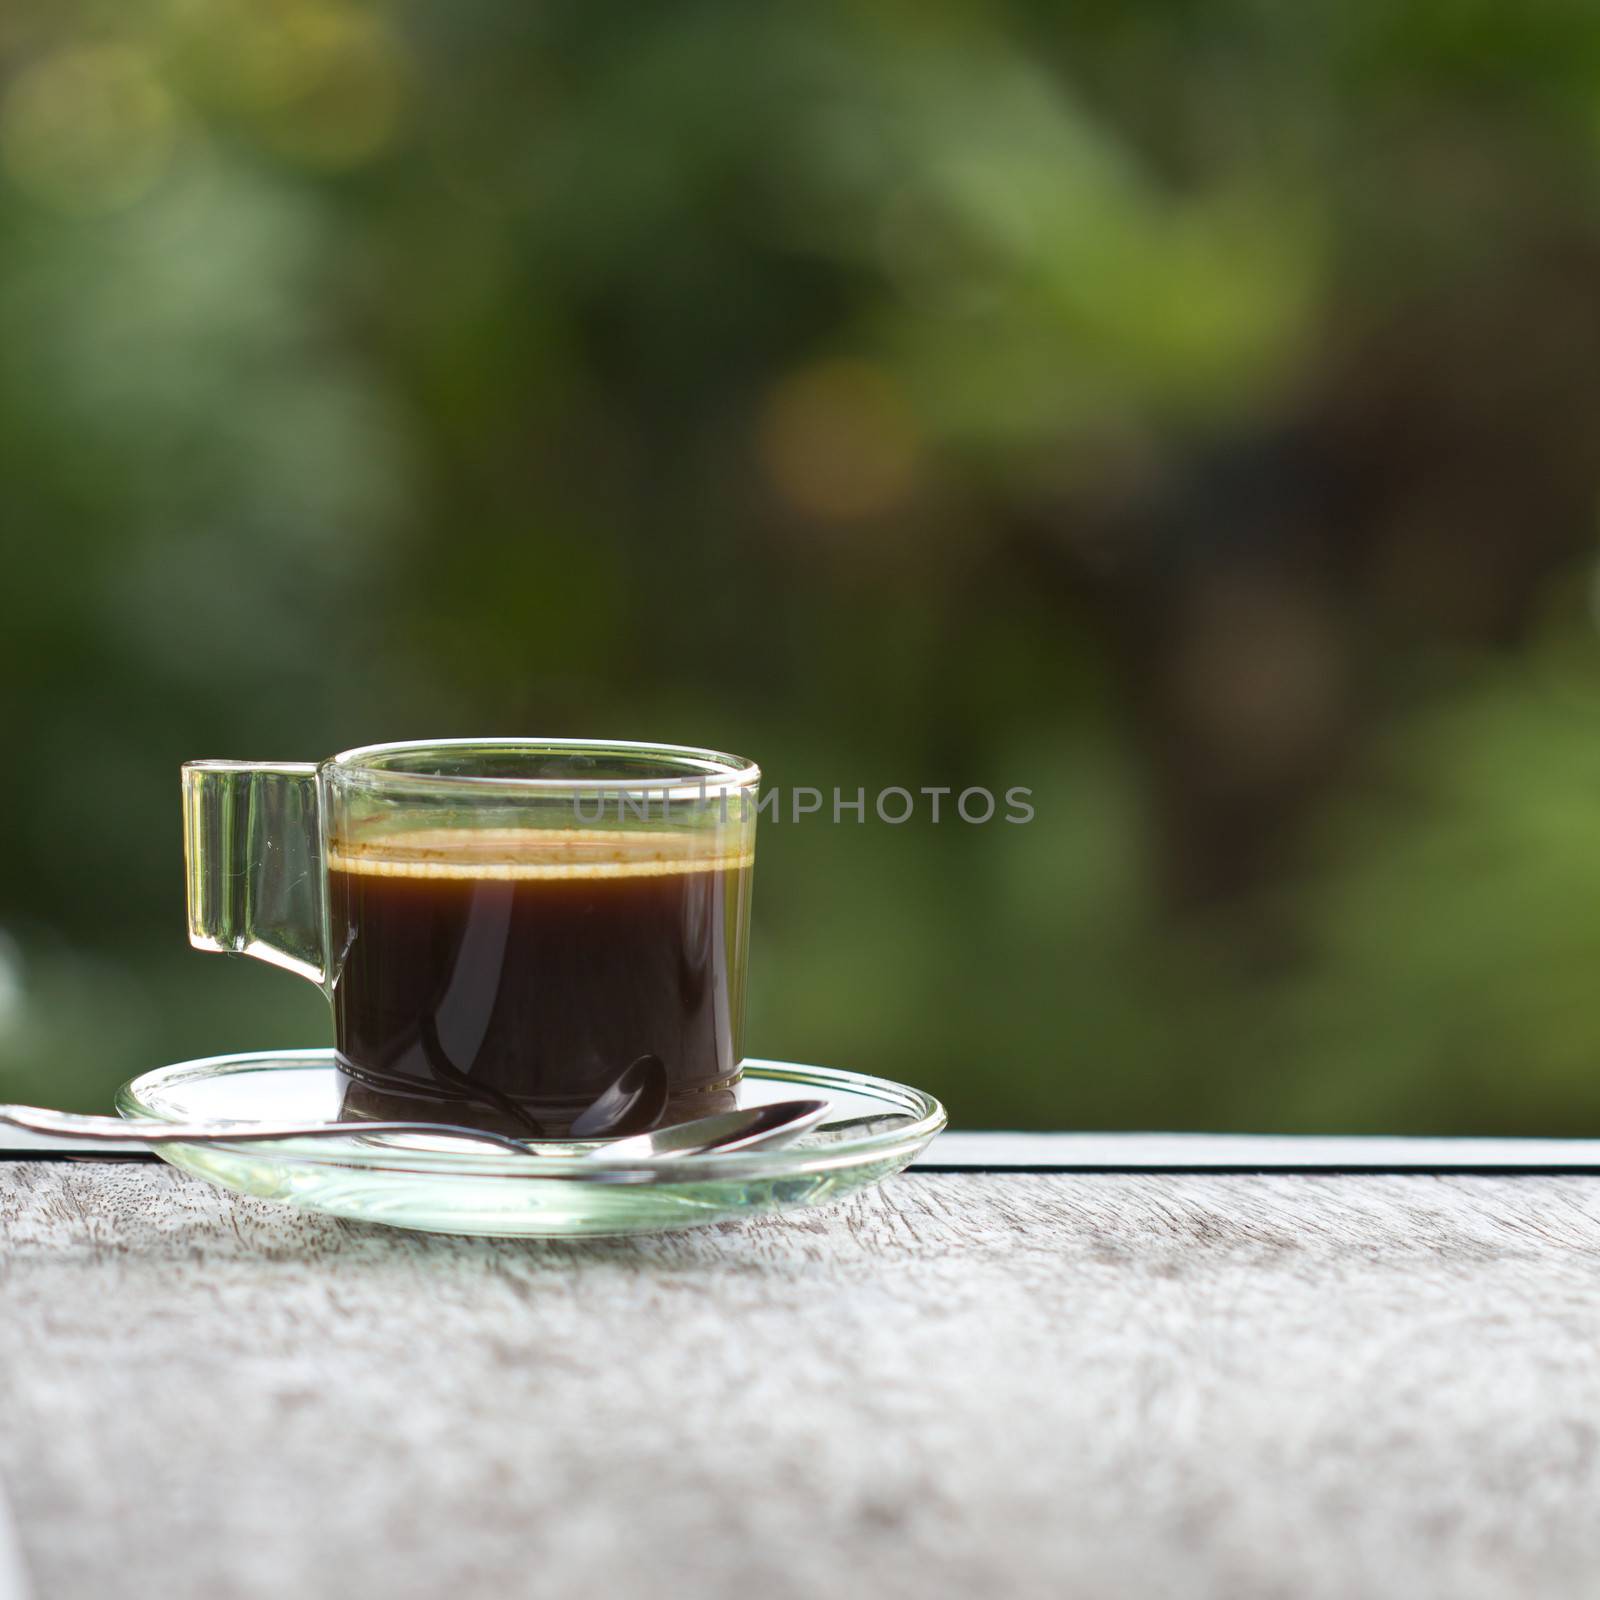 Black coffee in a glass on the table